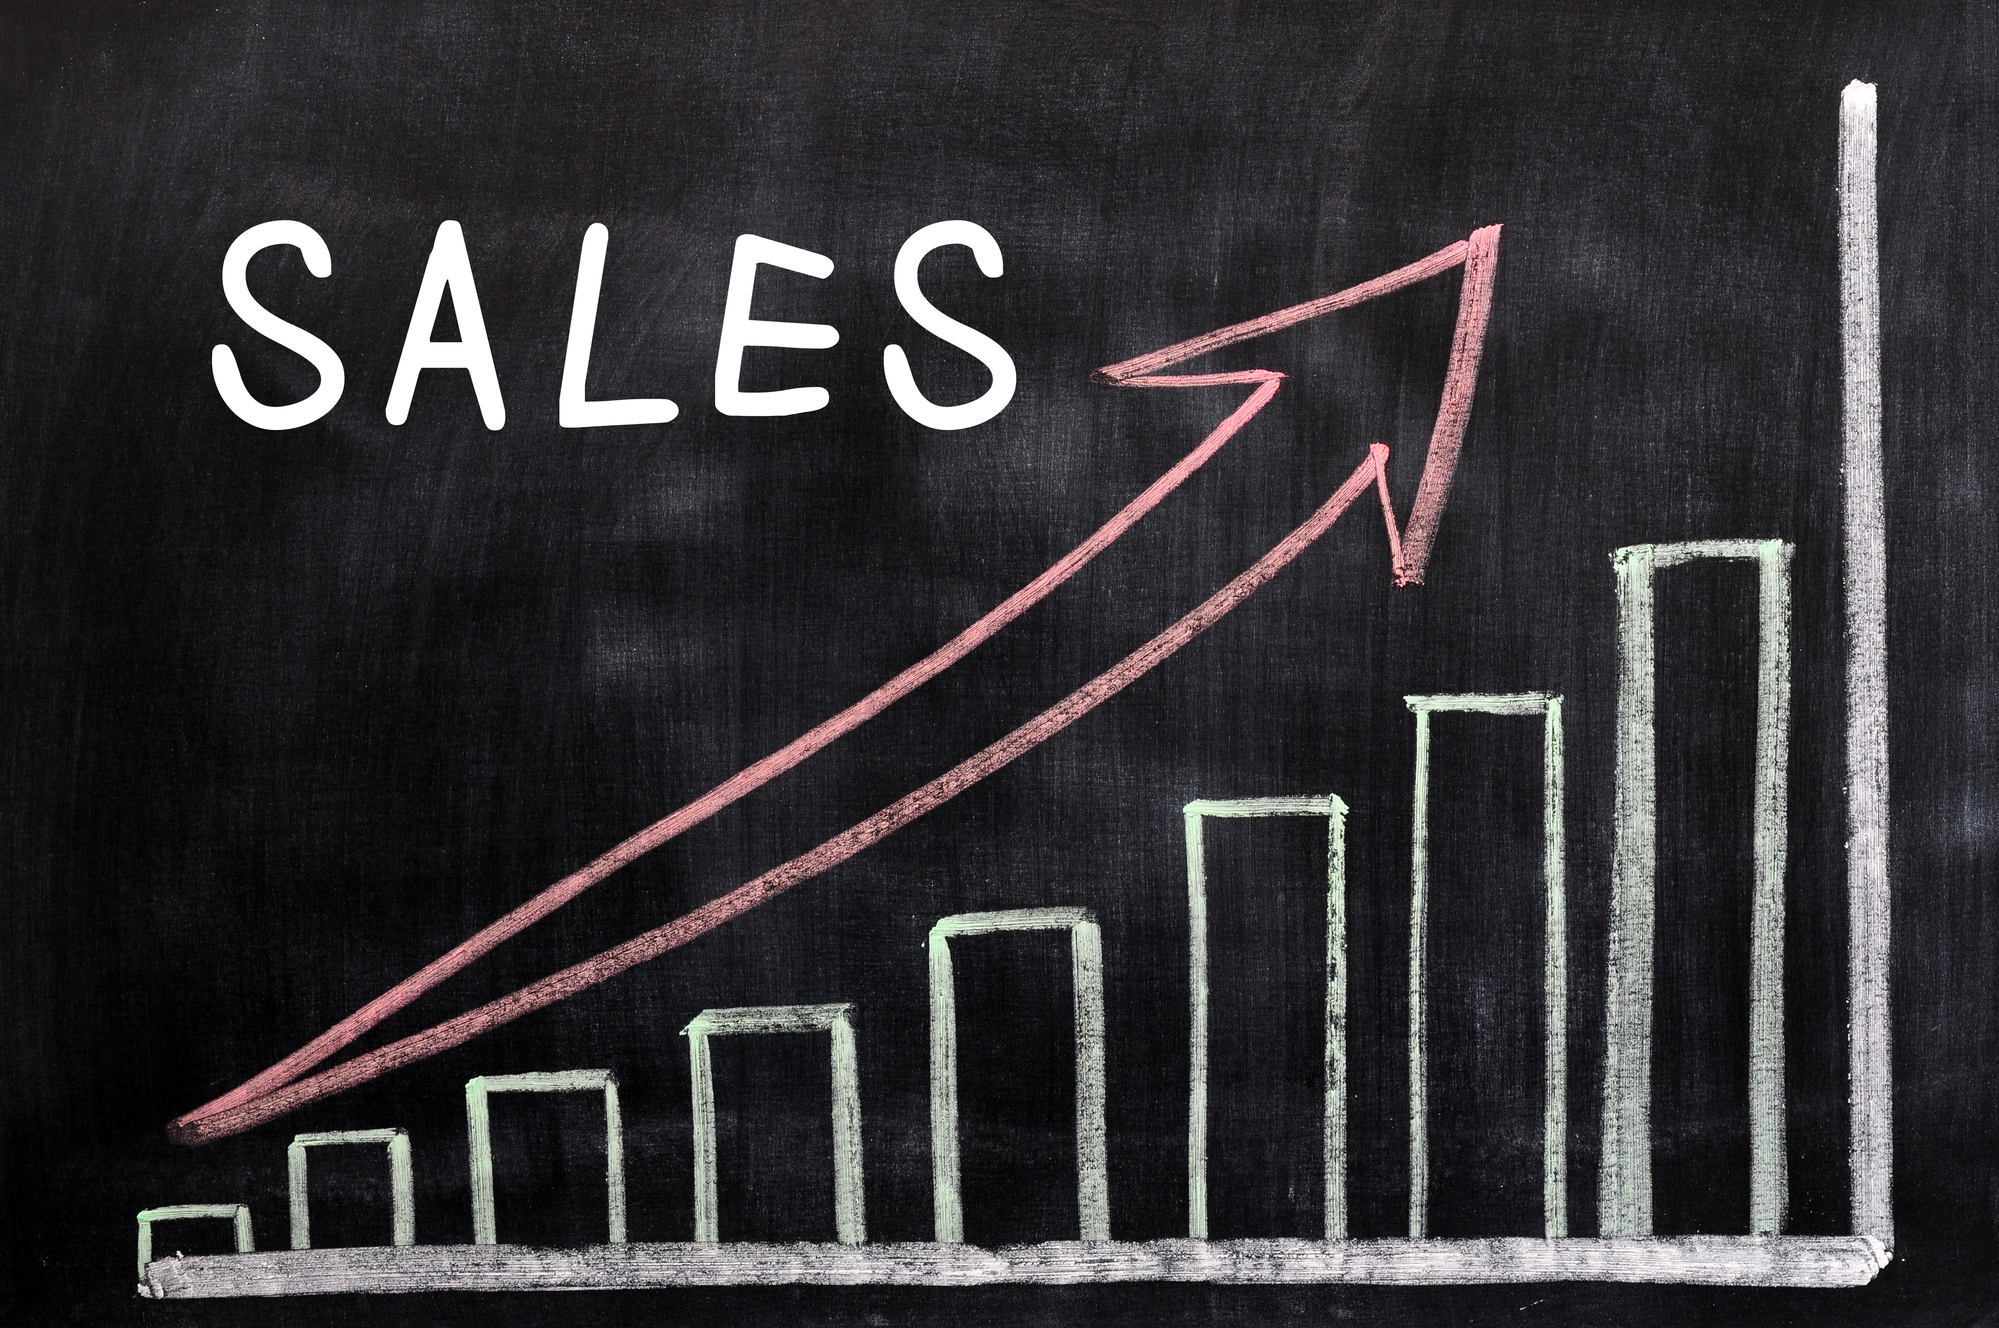 Sales graph on a blackboard with an arrow pointing up.